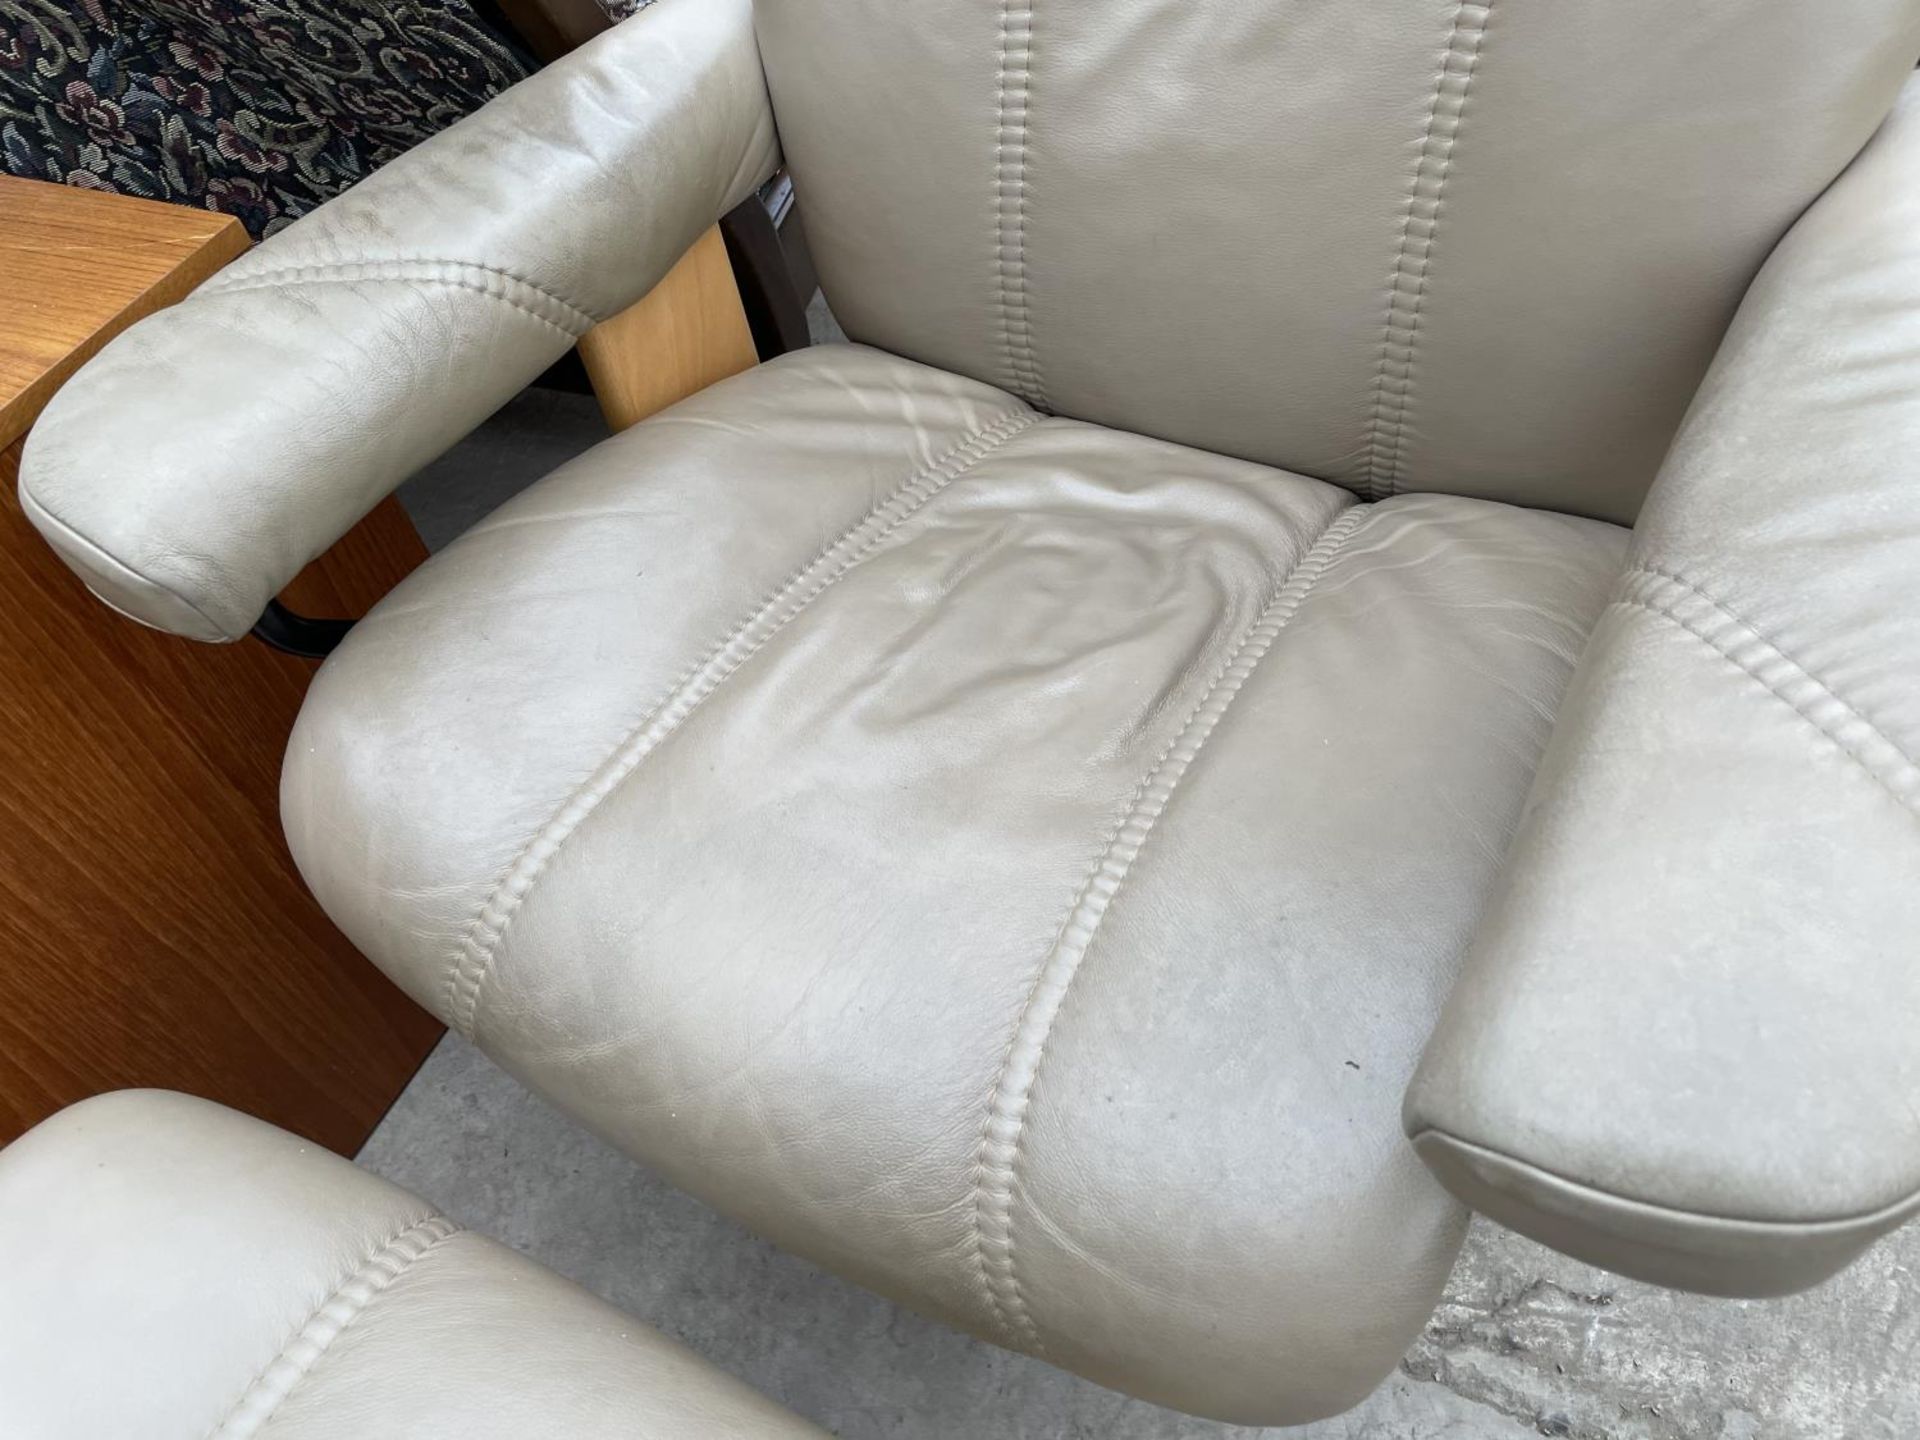 A STRESSLESS EKORNES RECLINER CHAIR COMPLETE WITH STOOL - Image 4 of 8